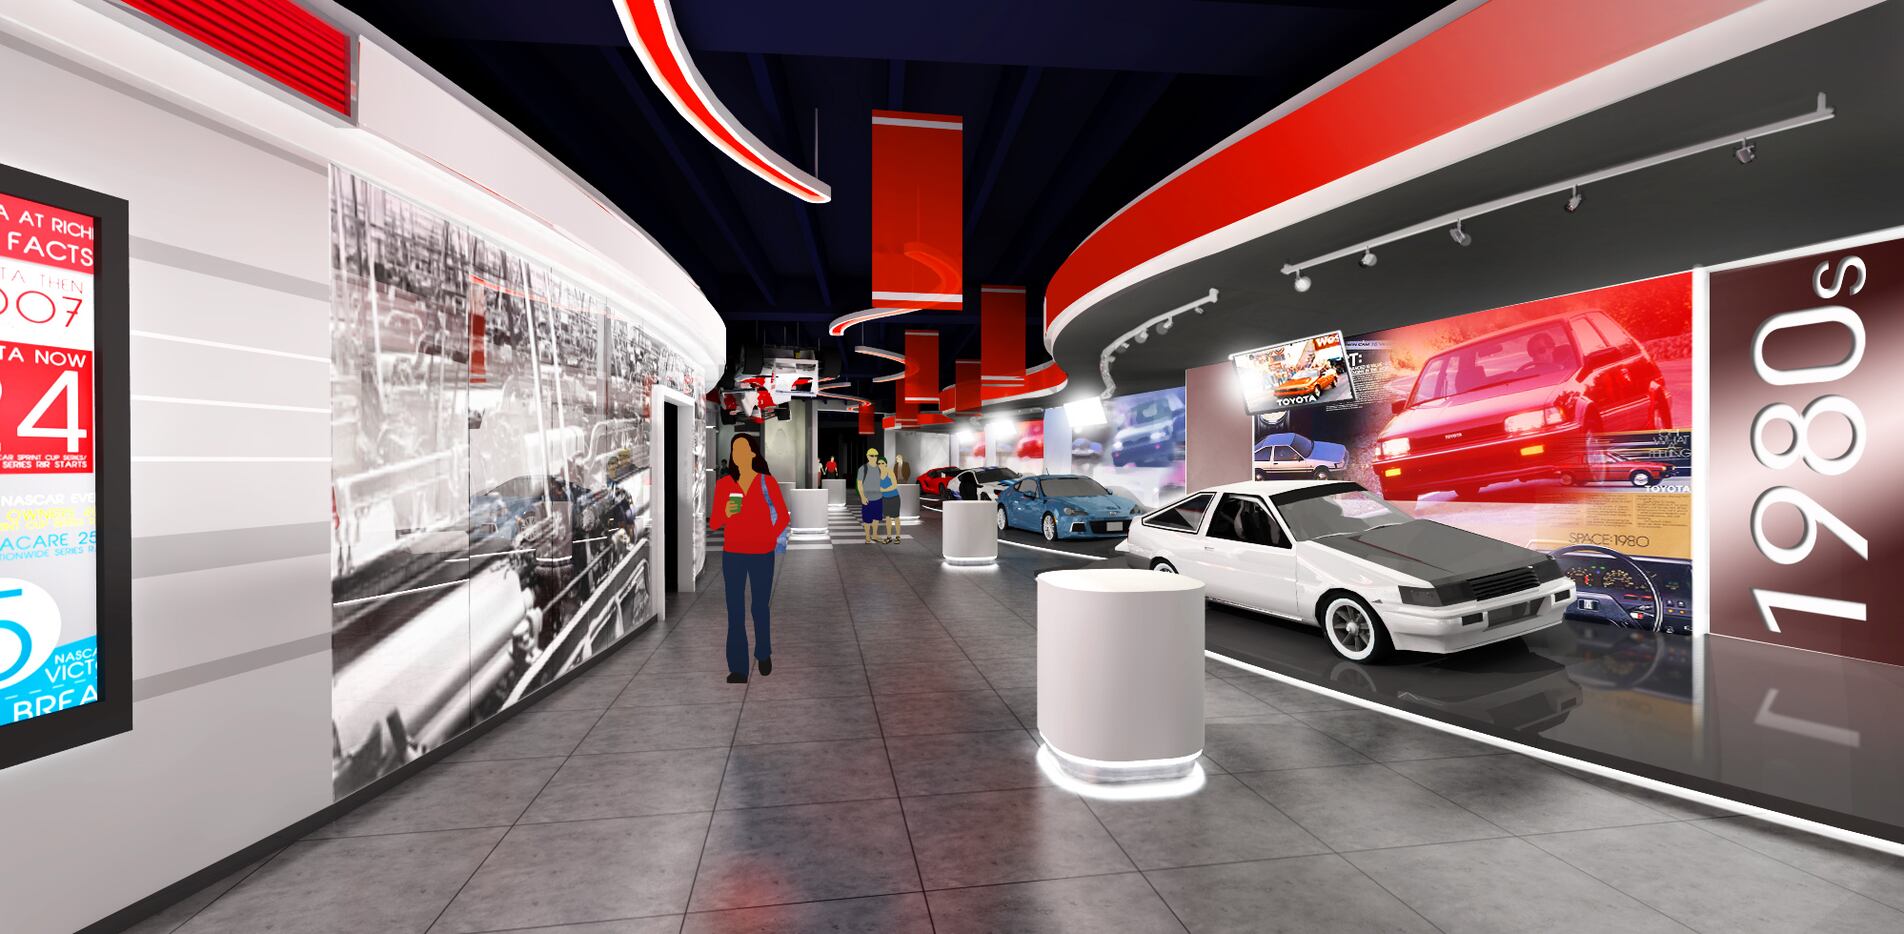 Toyota Experience Center, shown in a rendering, will open to the public in 2019 at Toyota's...